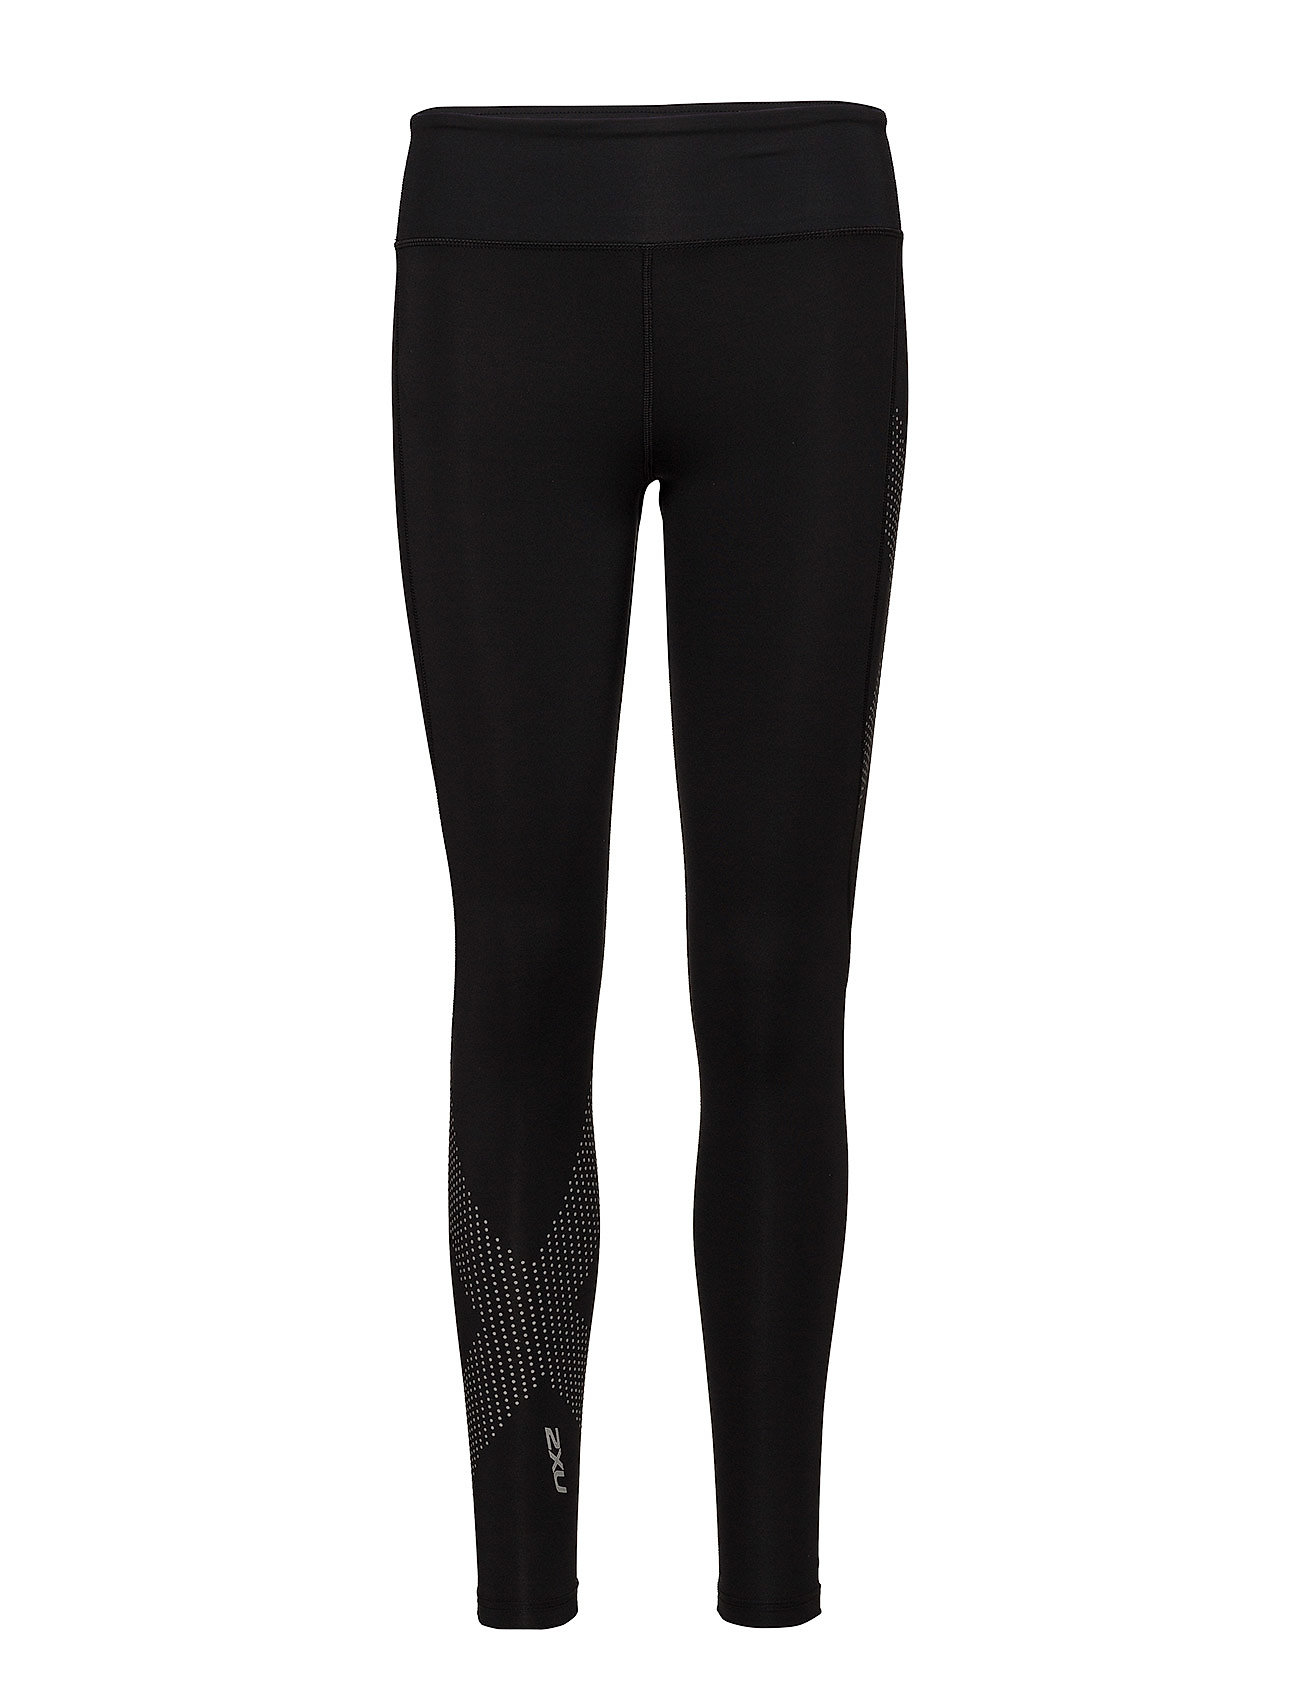 BLACK/DOTTED REFLECTIVE LOGO 2XU Mid-Rise Compression Tight-W Running/training Tights Sort 2XU for dame - Pashion.dk